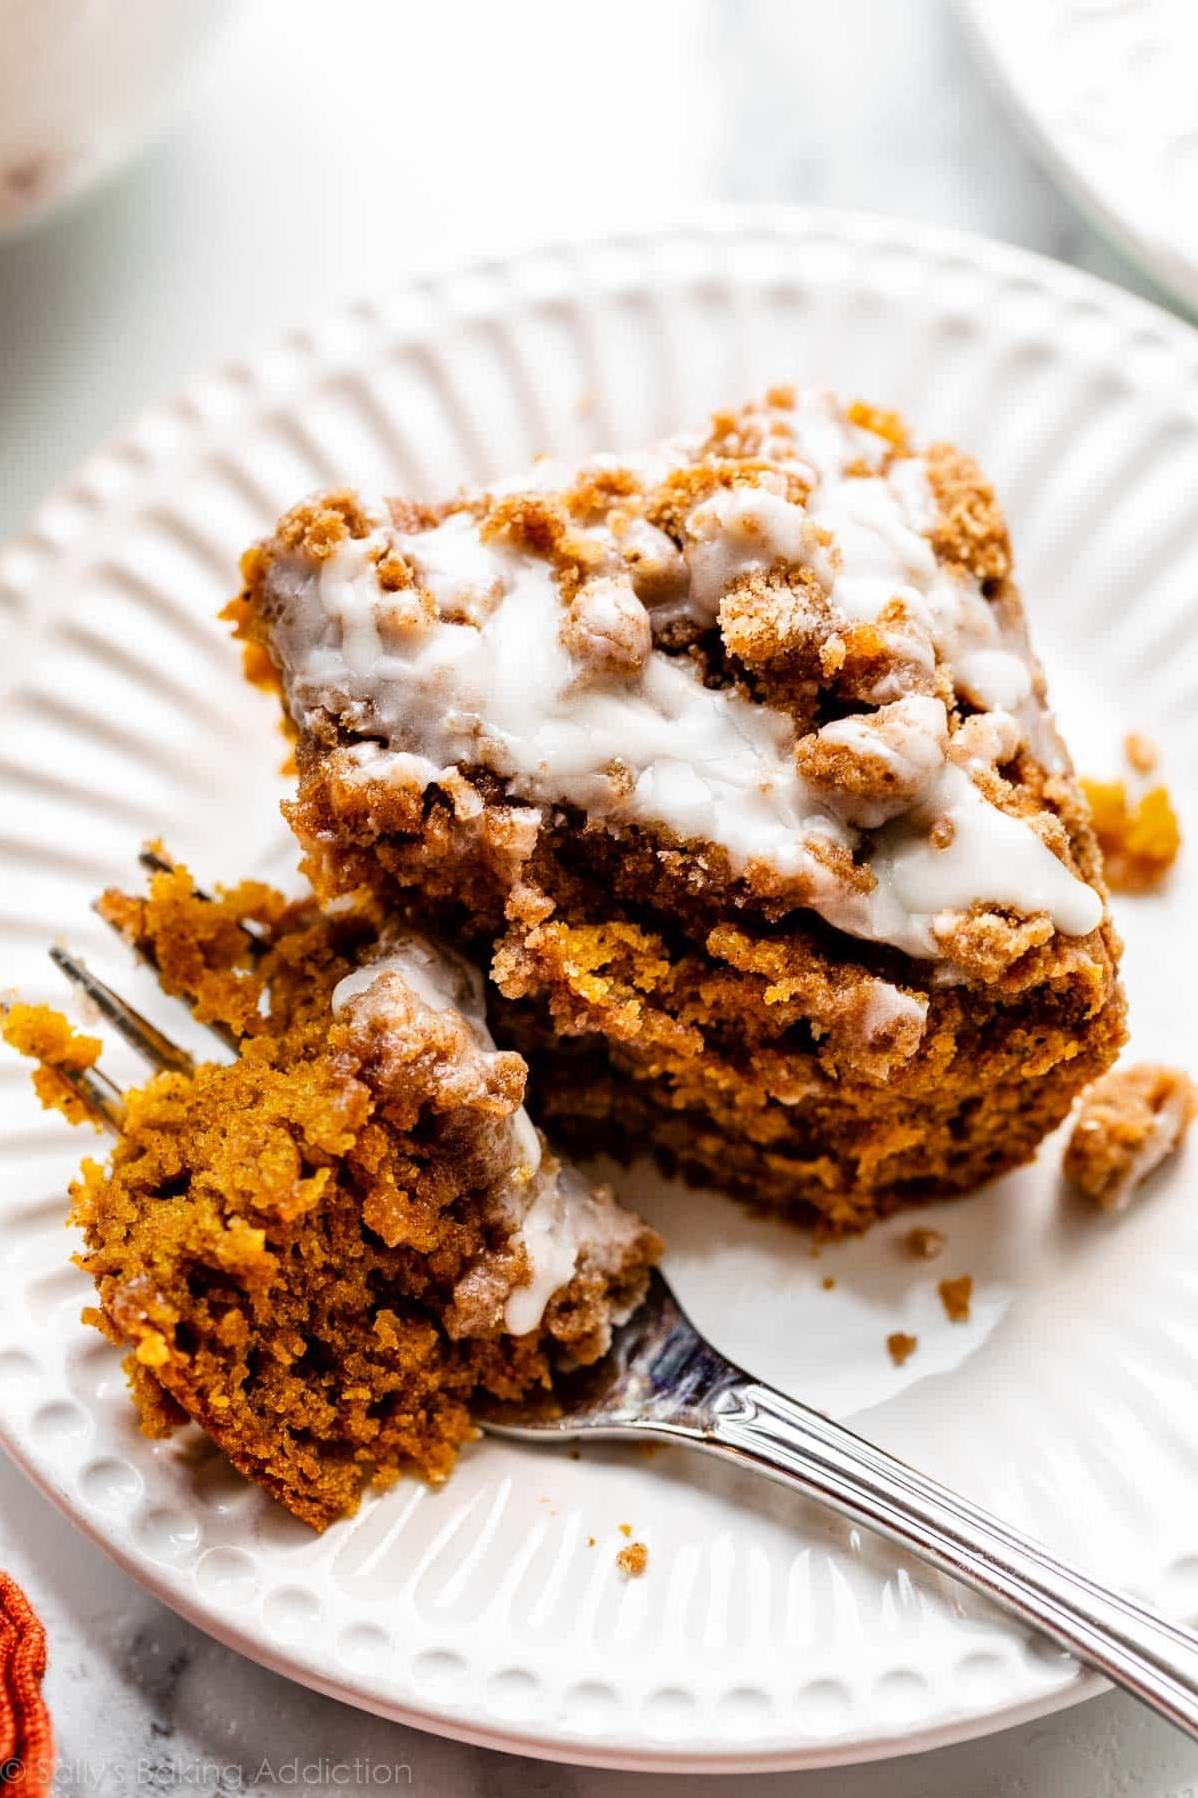  Sink your teeth into our warm and spiced Pumpkin Coffee Break Cake.